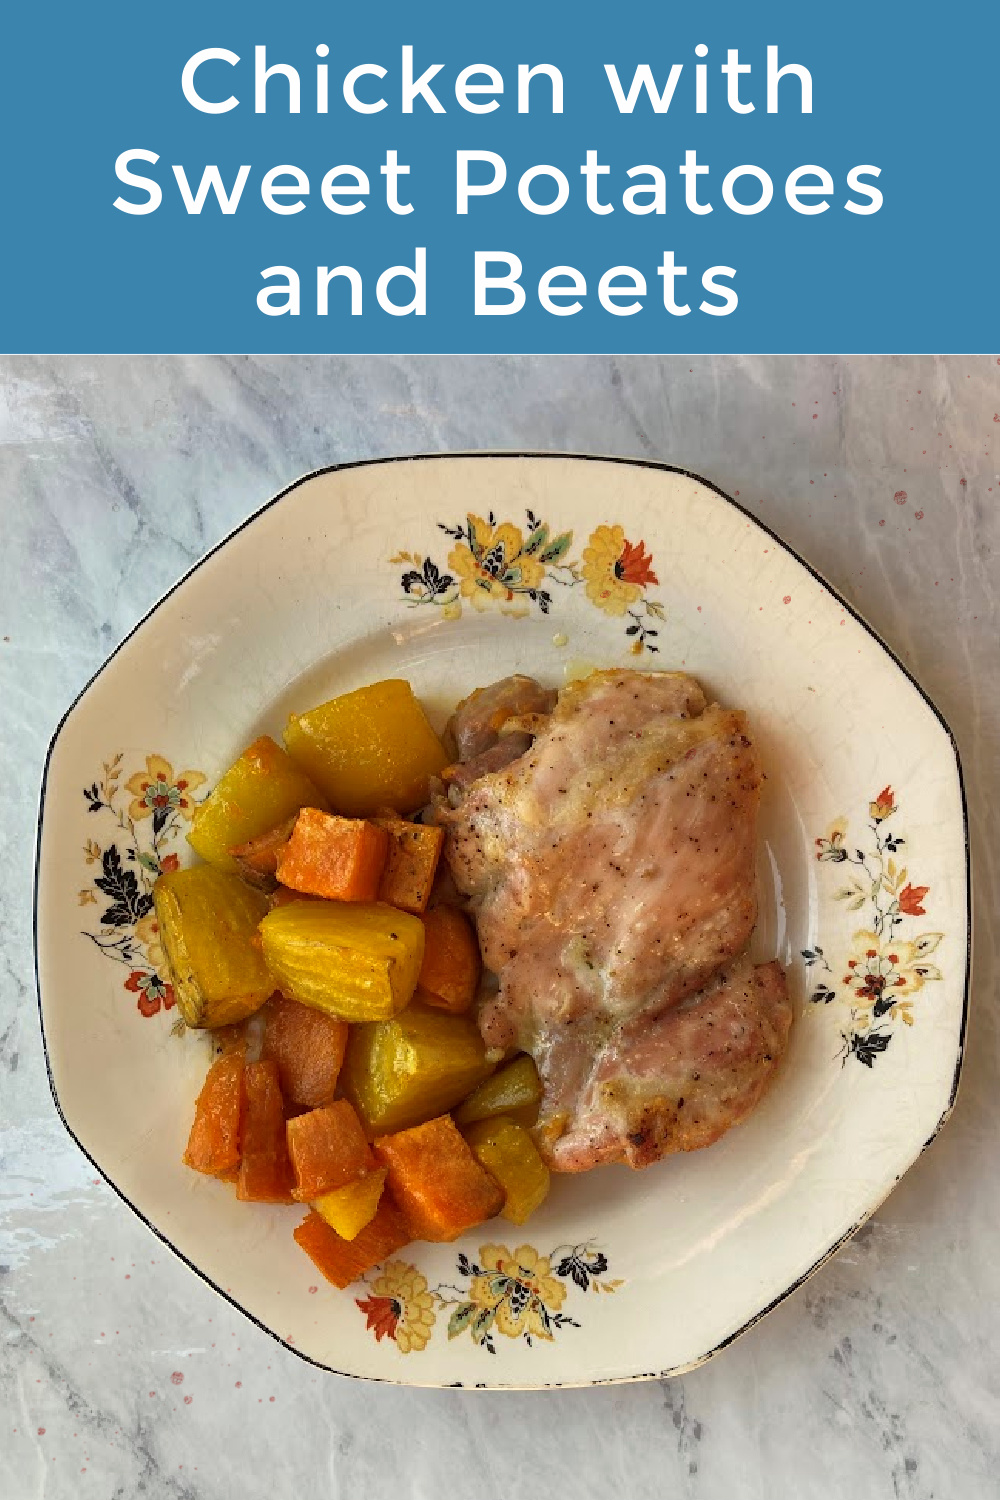 Chicken with Sweet Potatoes and Beets